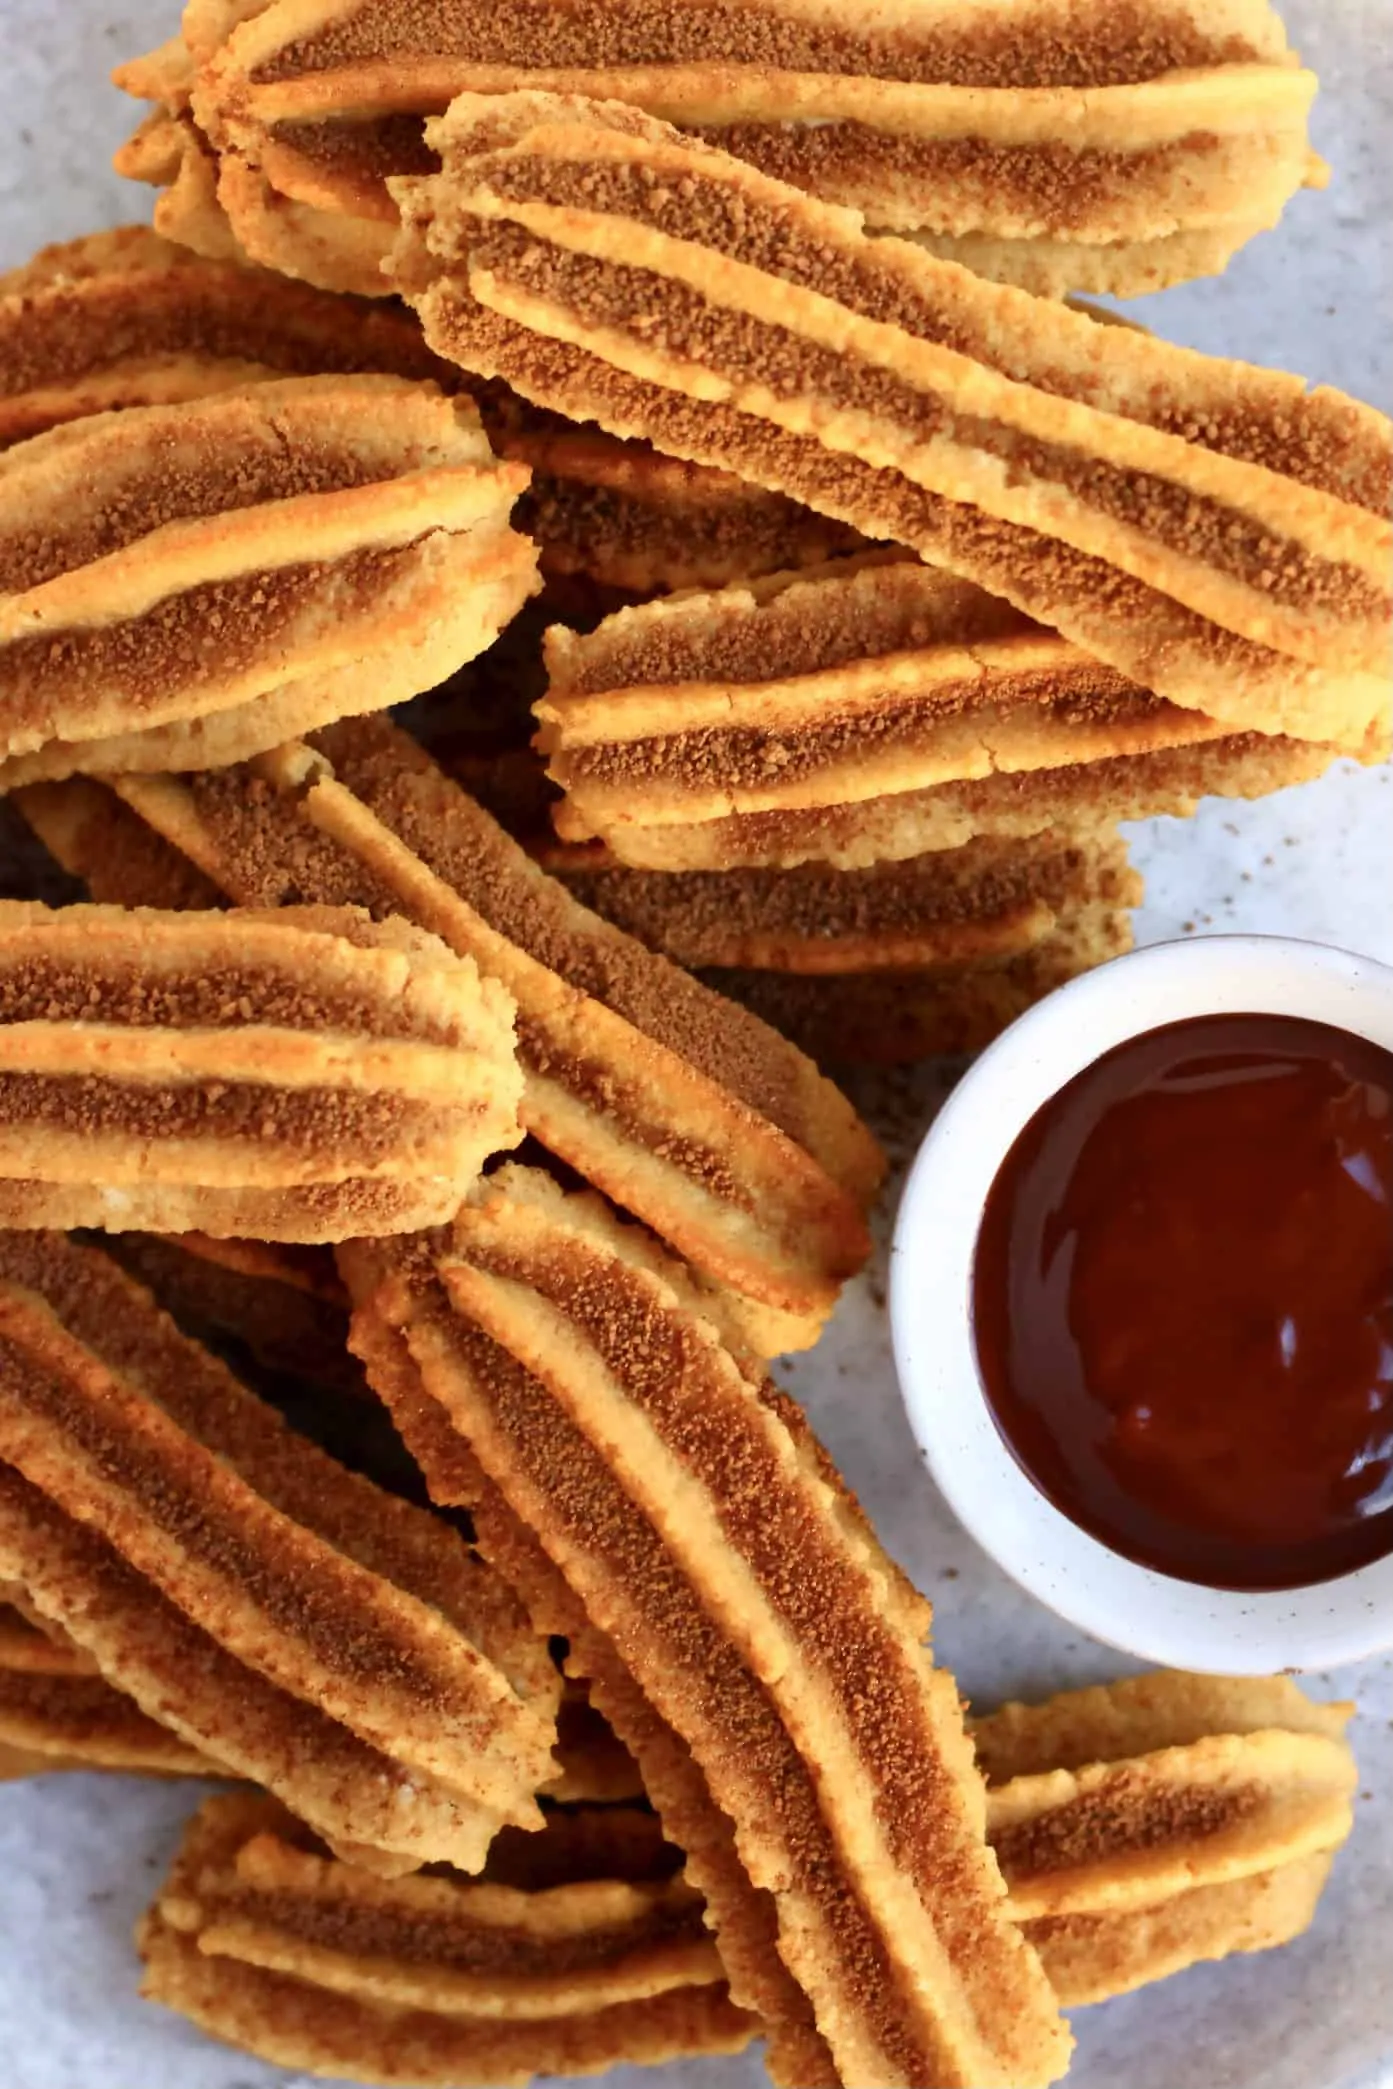 Several gluten-free vegan churros dusted with cinnamon sugar on a plate with a bowl of vegan chocolate sauce